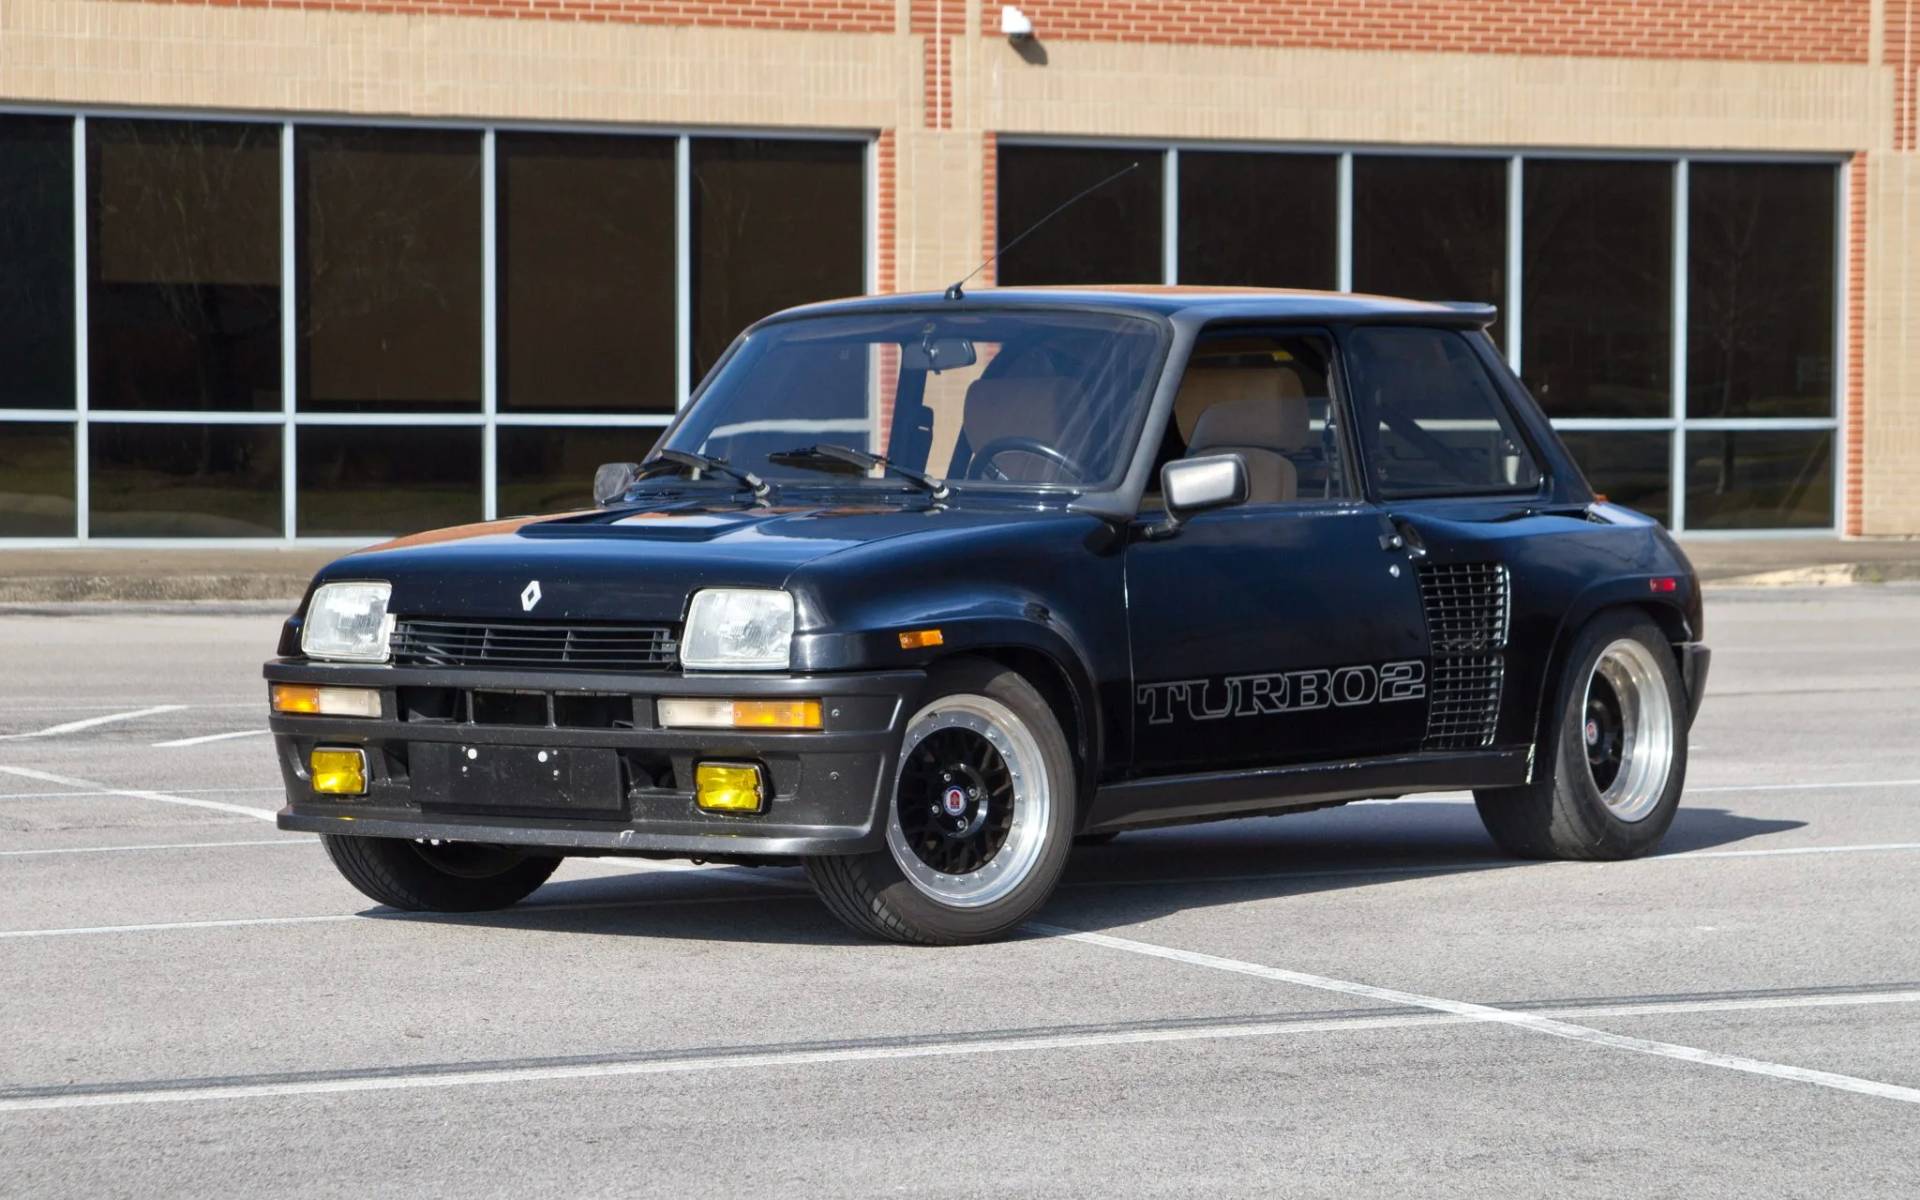 Renault 5 Turbo 2 Sells for 160,000 USD on Bring a Trailer - The